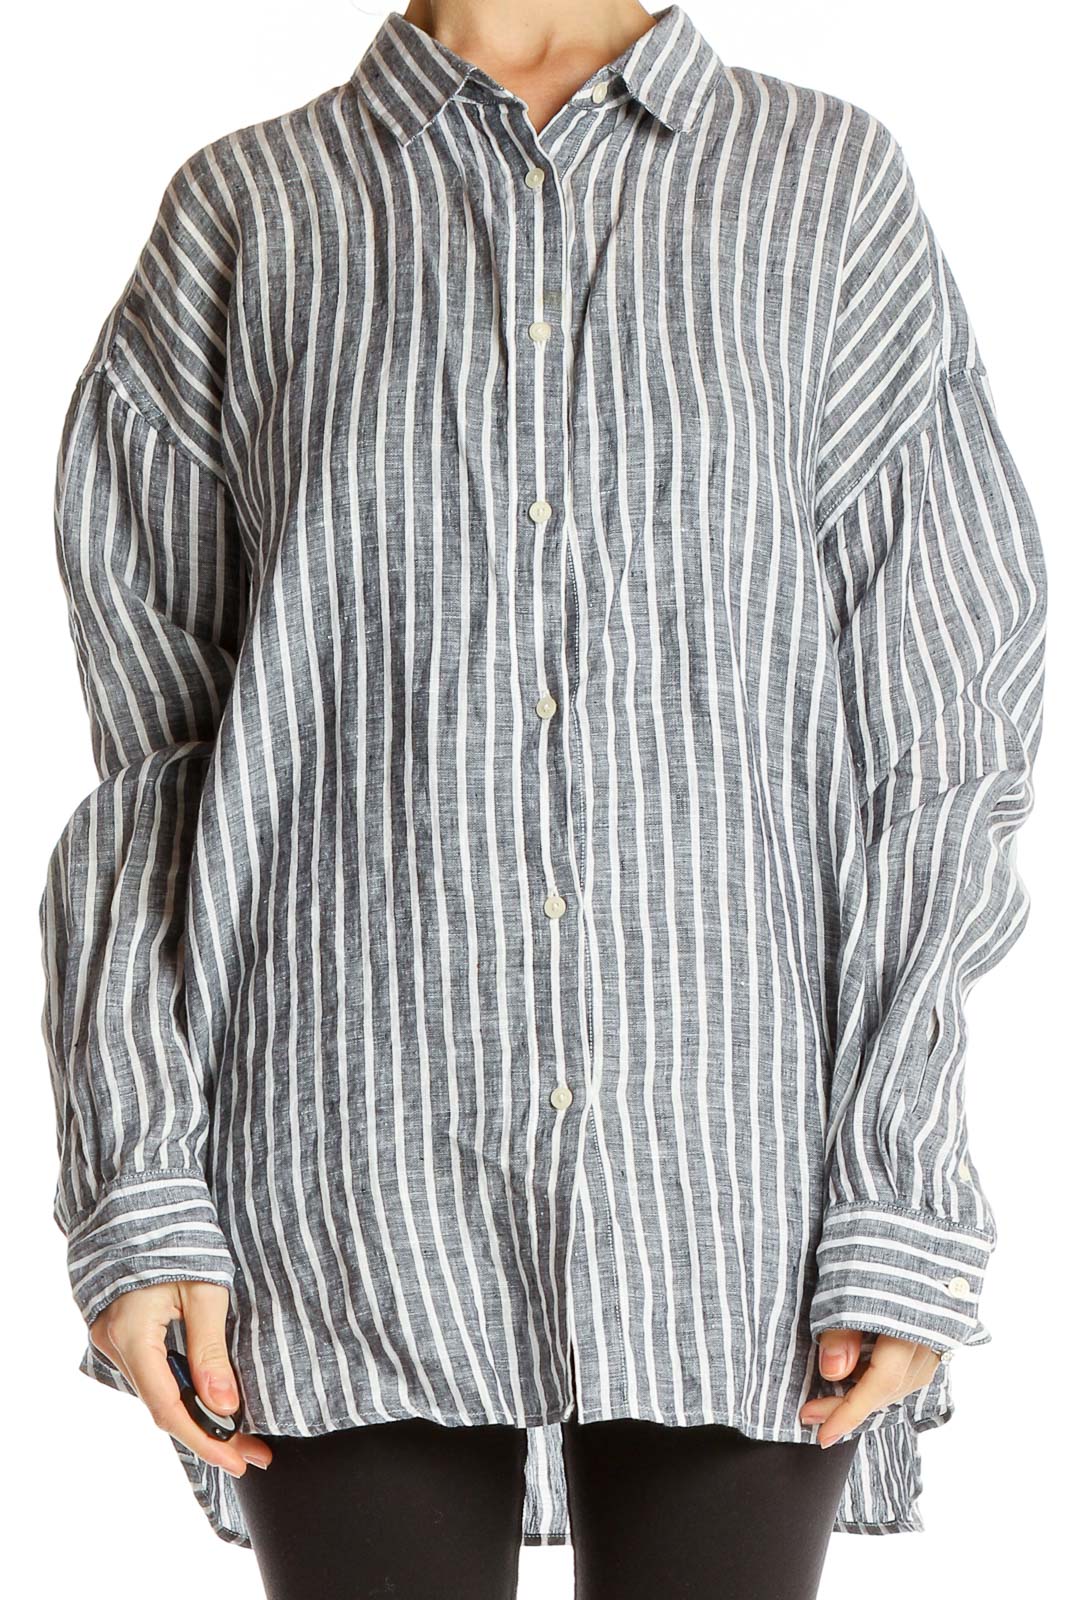 Gray Striped Casual Linen Button-Up Shirt Front